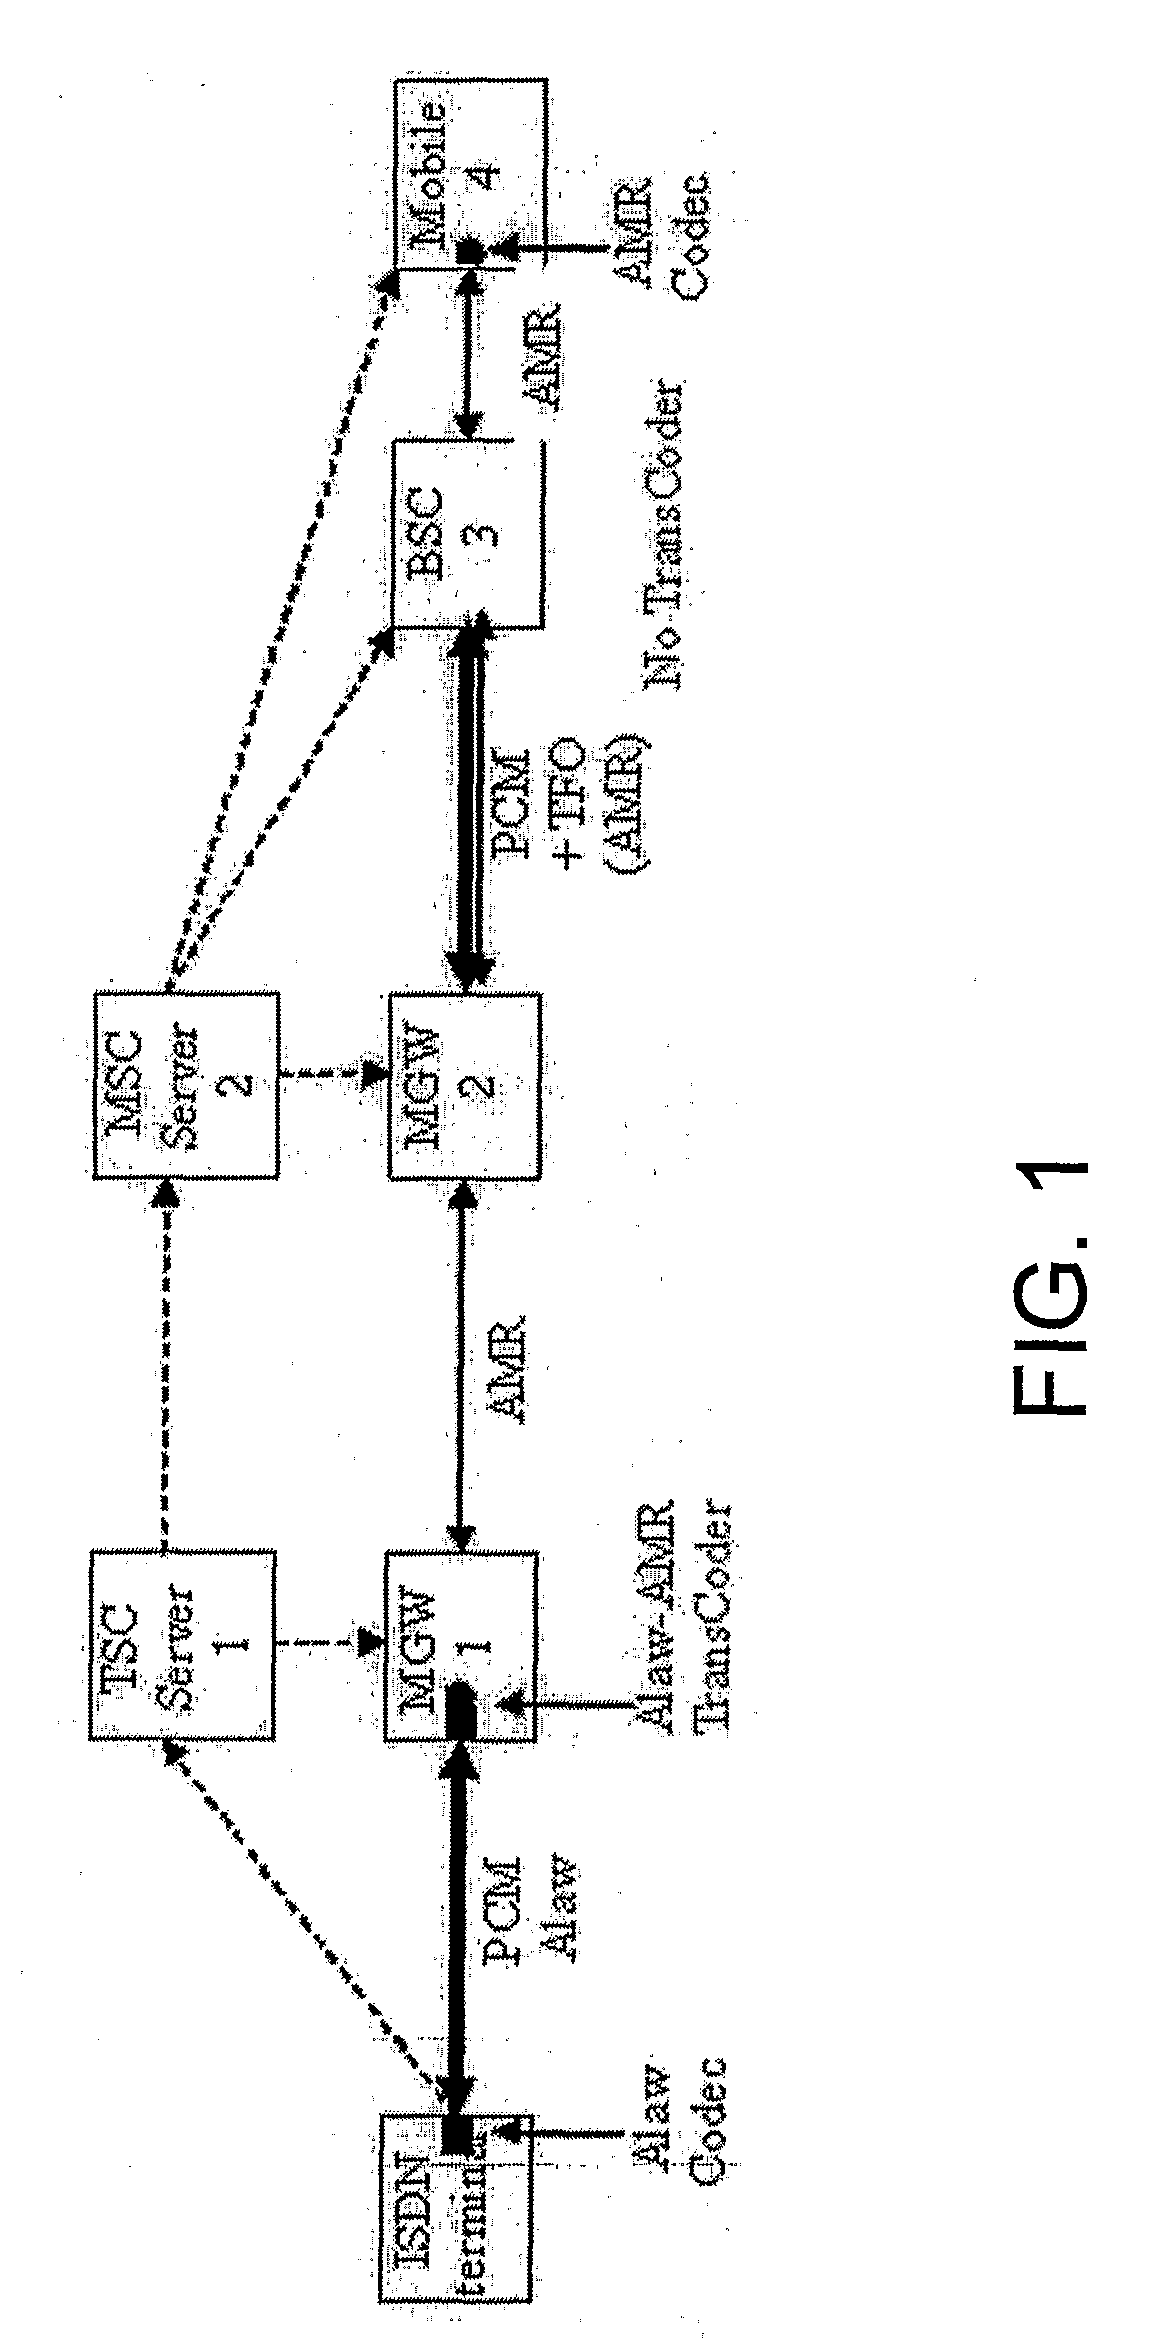 Individual Codec Pathway Impairment Indicator for use in a Communication System